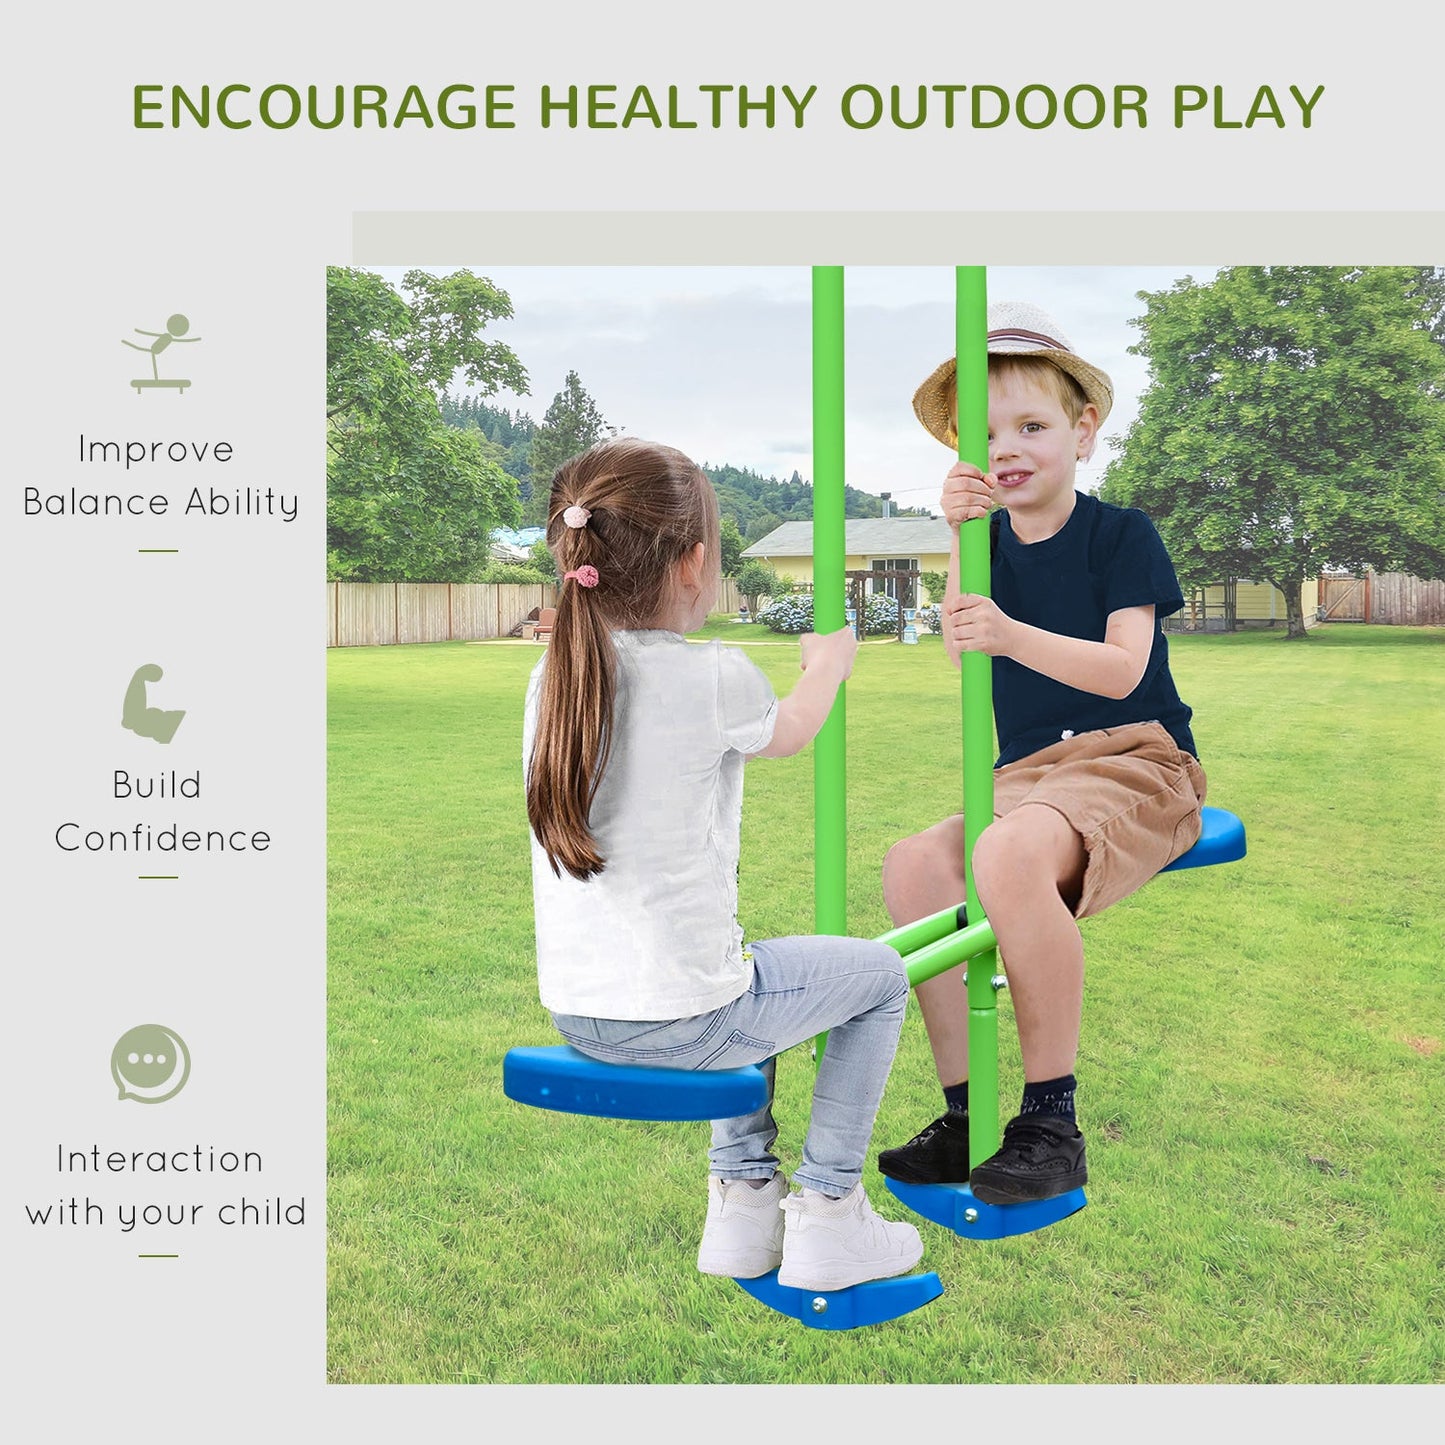 Toys and Games-Metal Swings & Seesaw Set Double Swing Seats with a Seesaw Height Adjustable Children Backyard Play Set for Toddlers Over 3 Years Old, Blue - Outdoor Style Company